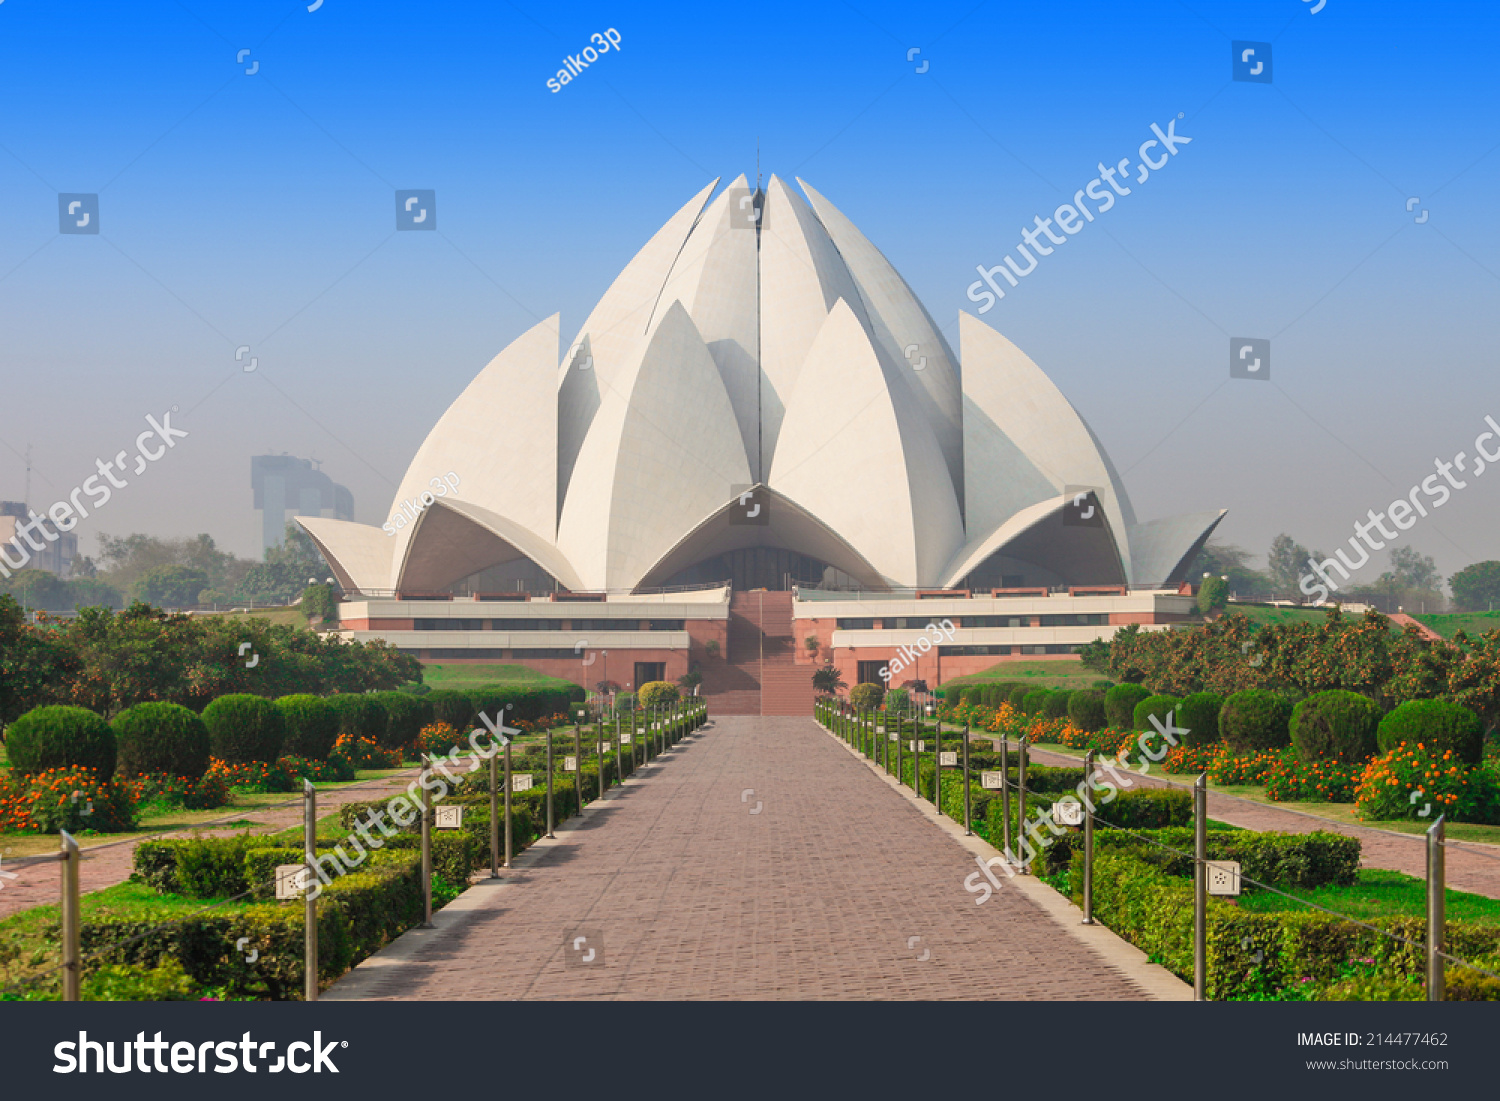 The Lotus Temple, located in New Delhi, India, is a Bahai House of Worship #214477462